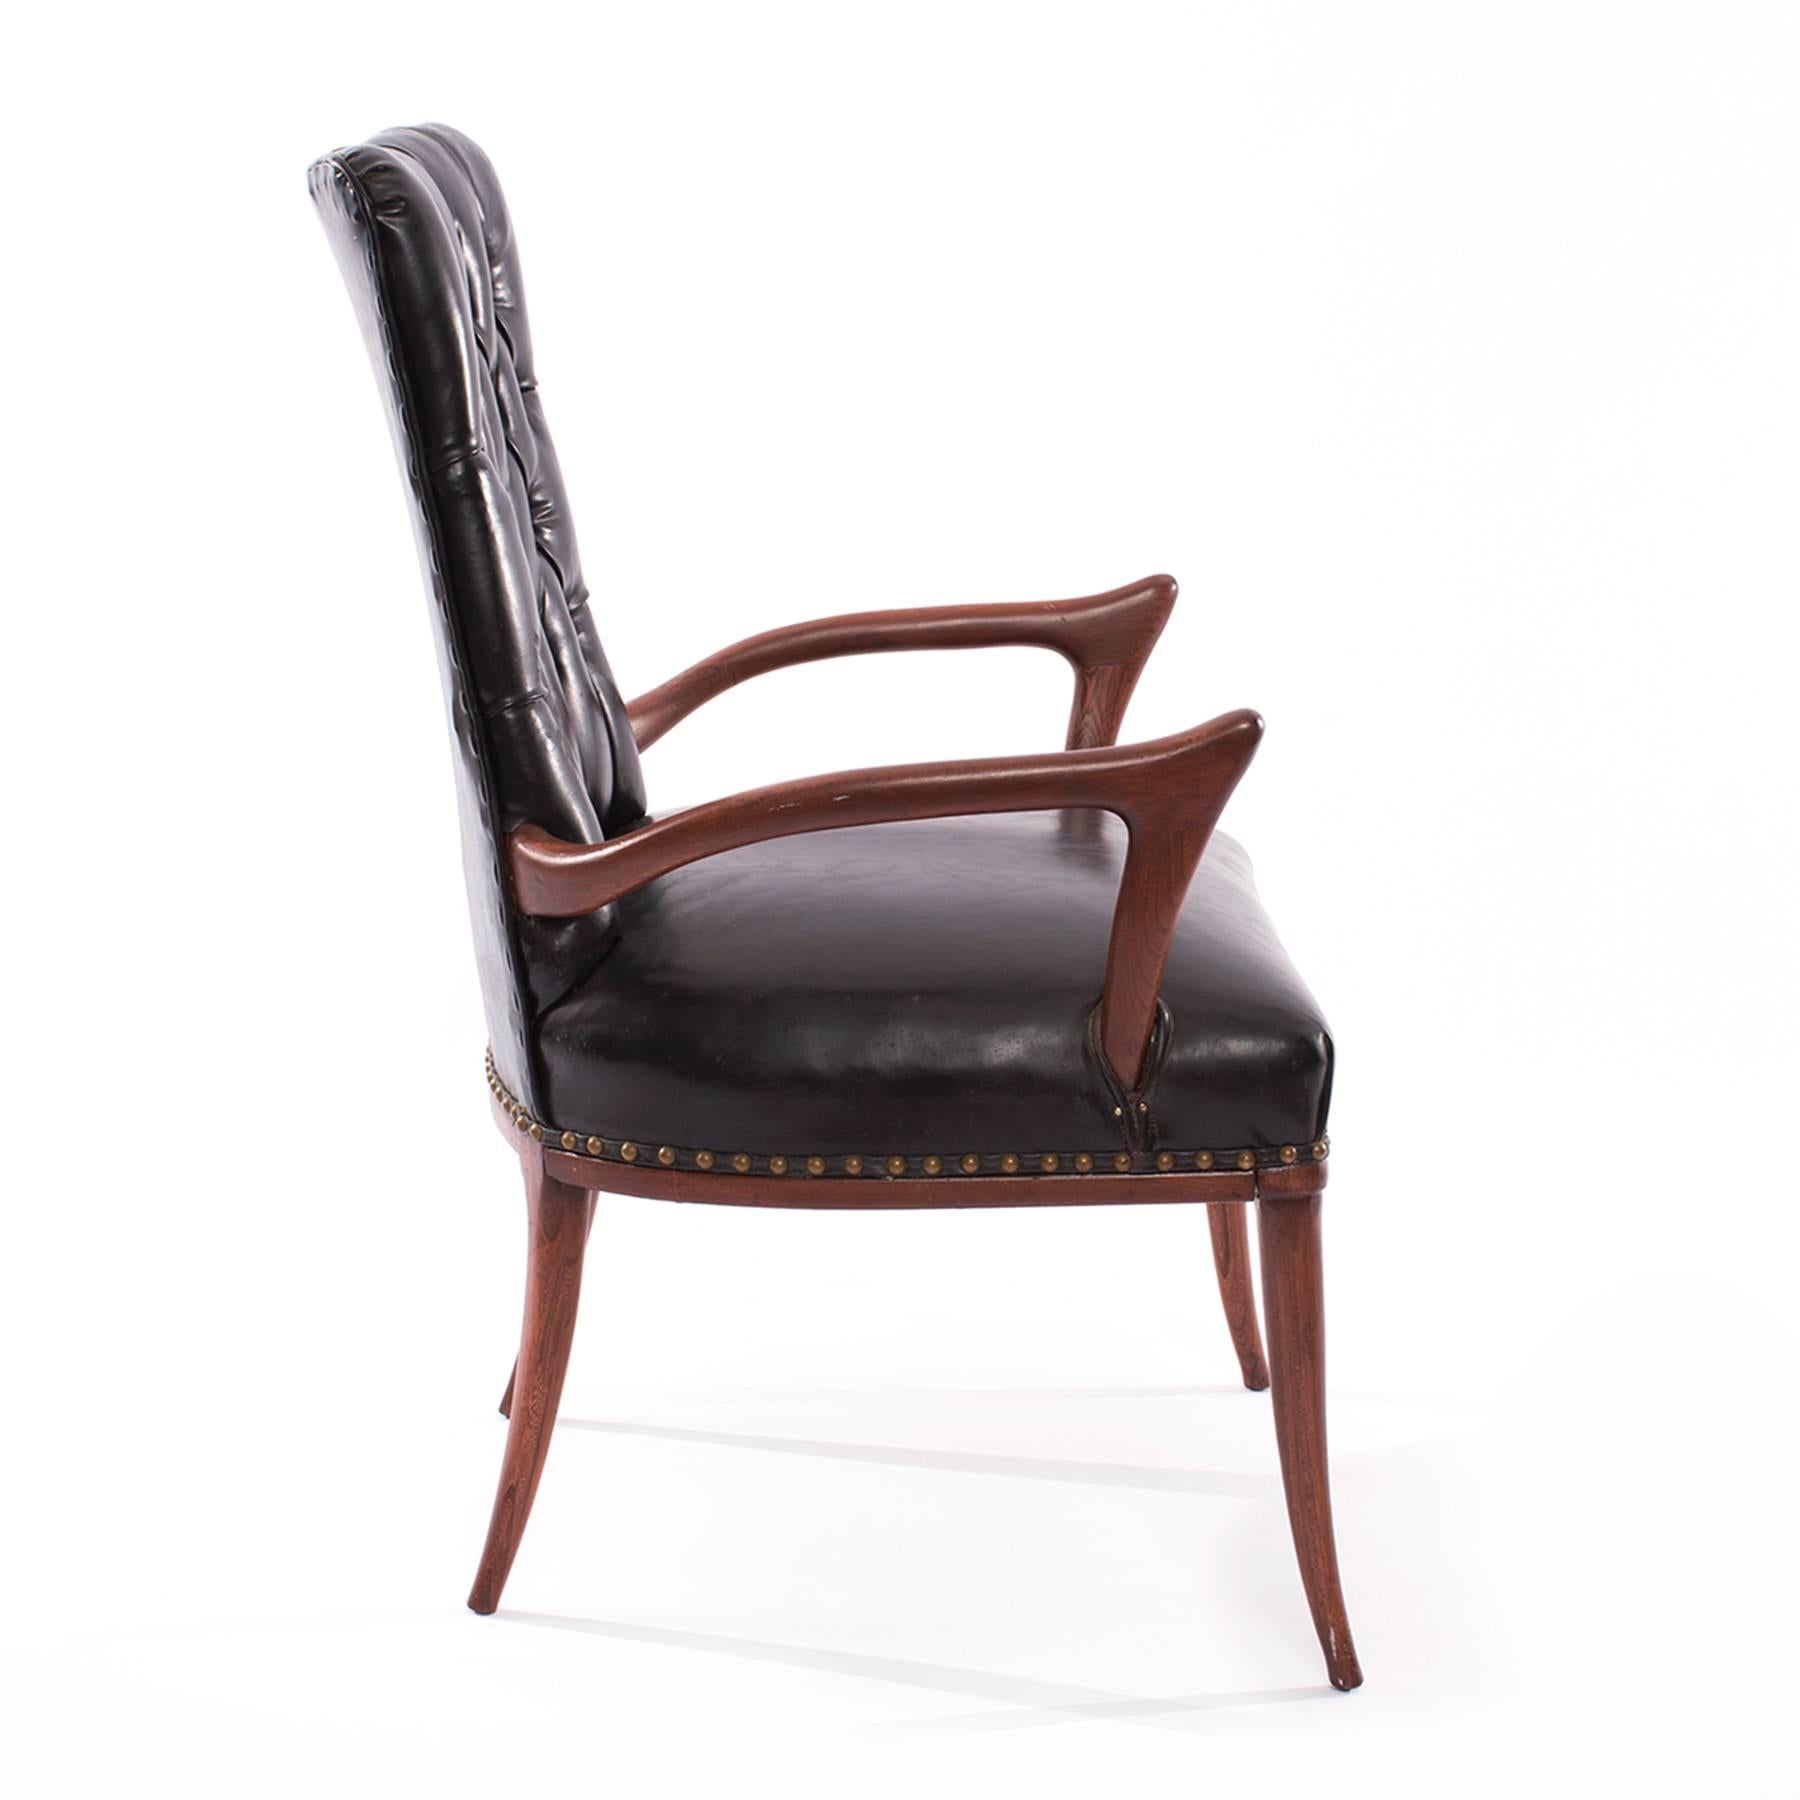 American Sculptural Mahogany and Upholstered Armchair